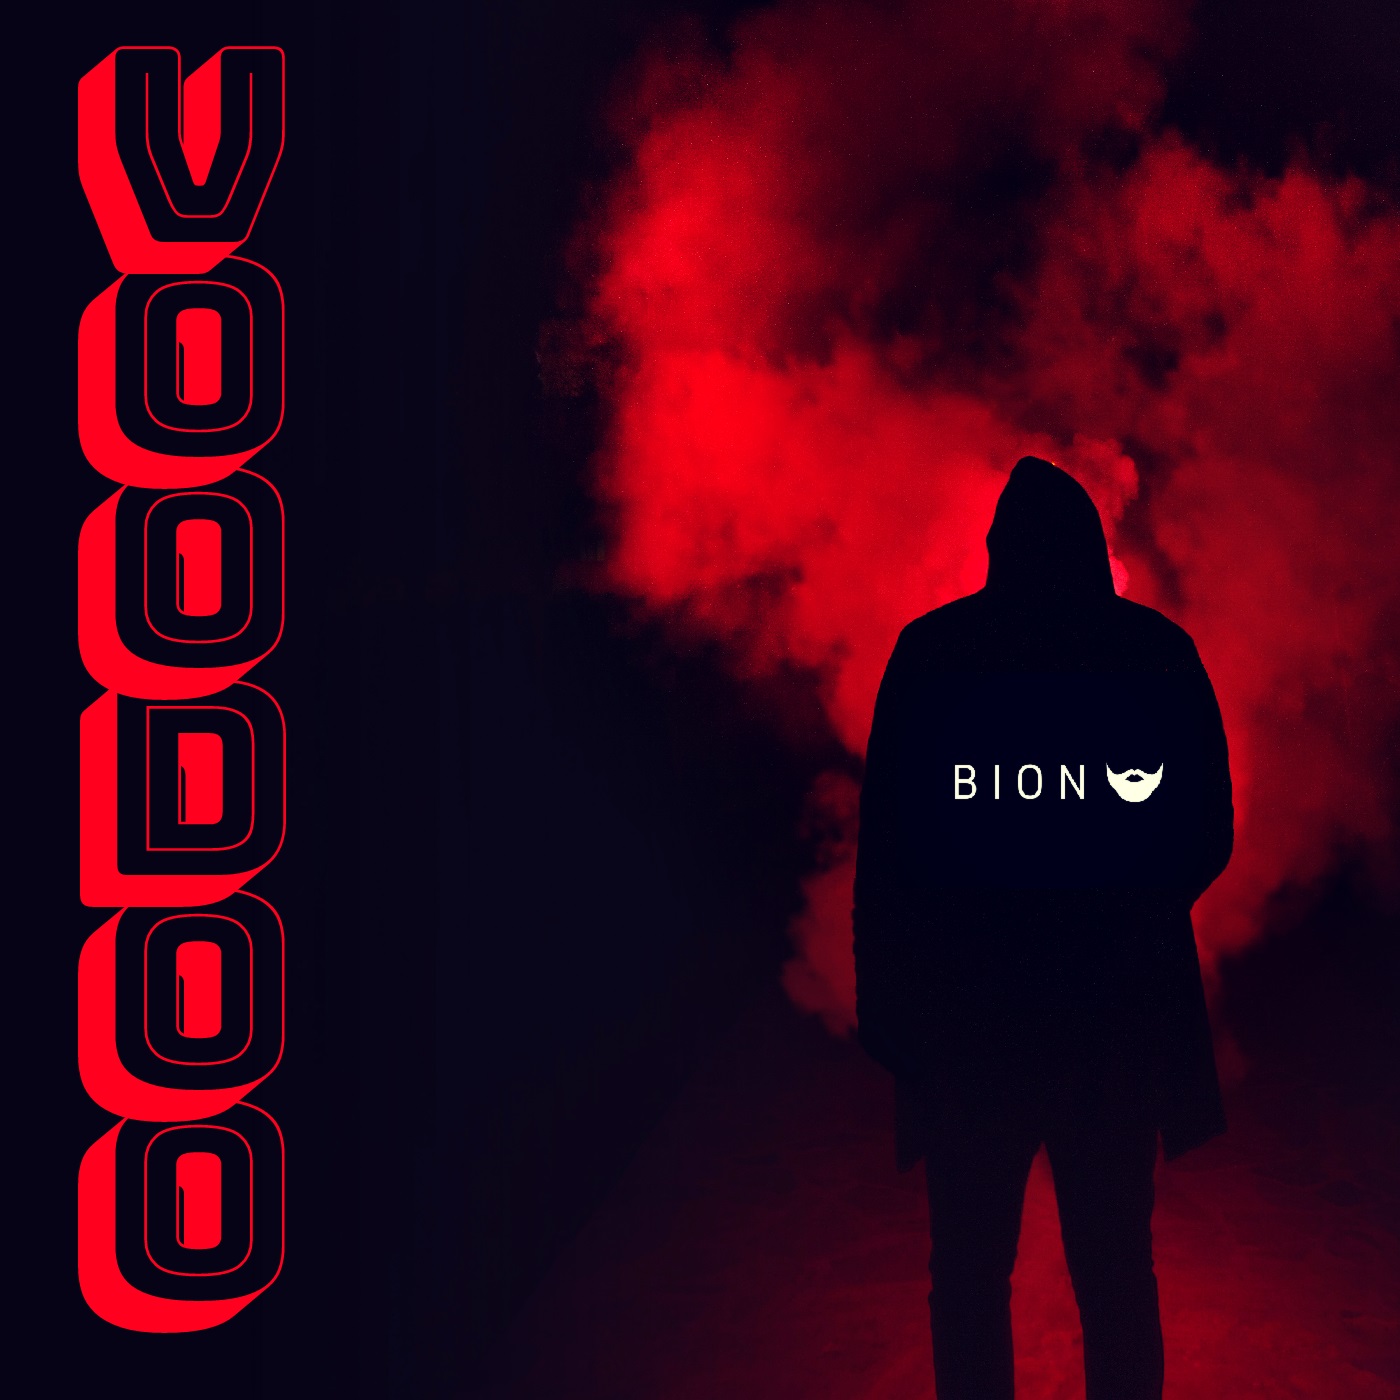 album cover for Voodoo by Bion